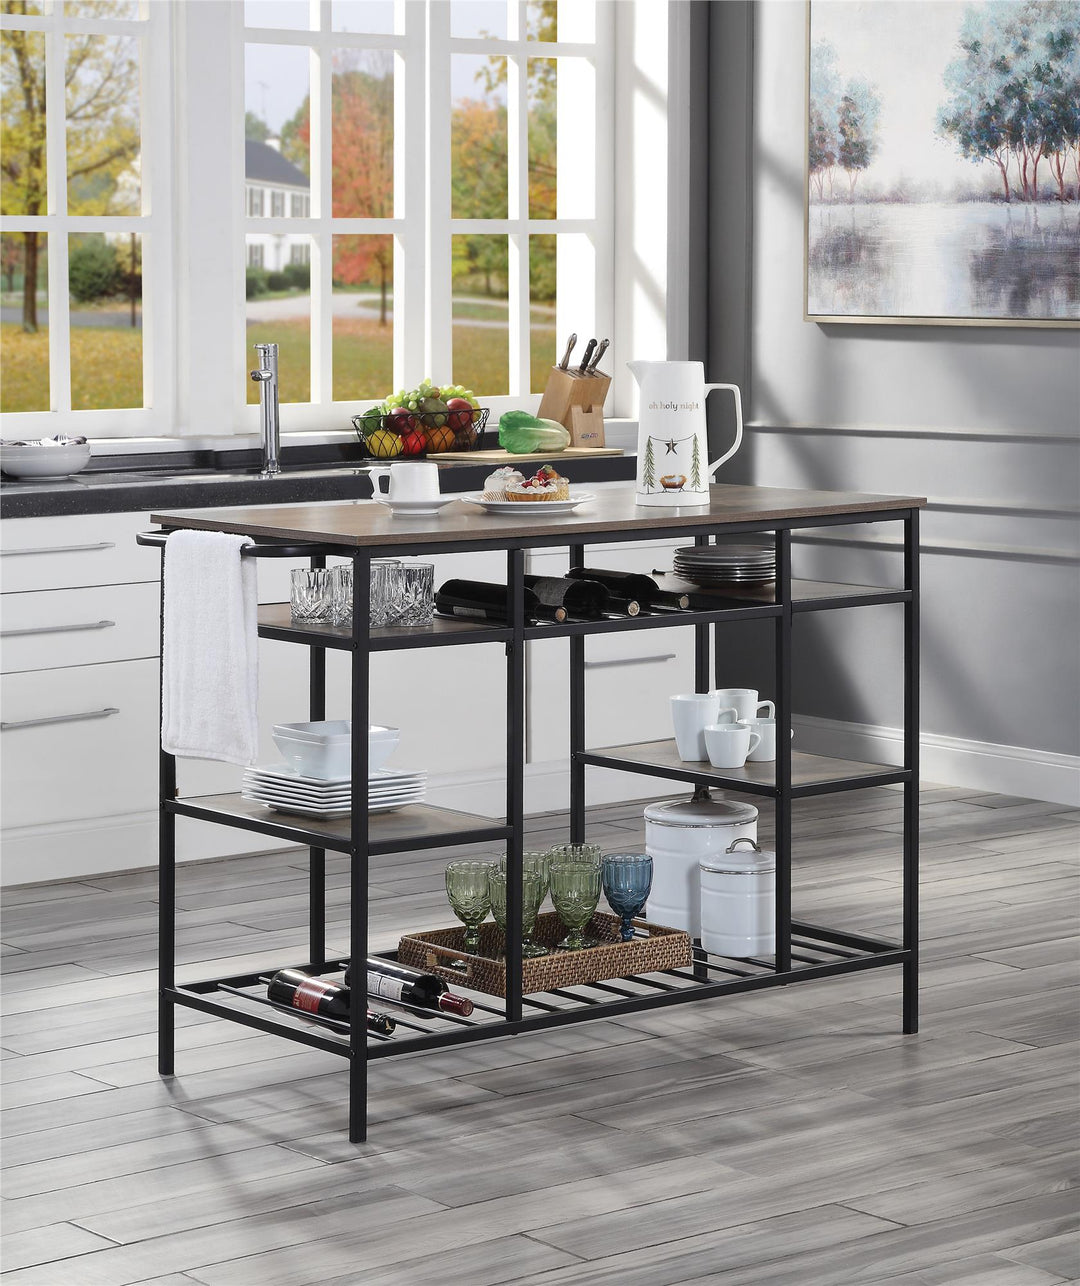 Kitchen storage solutions with metal frame -  N/A